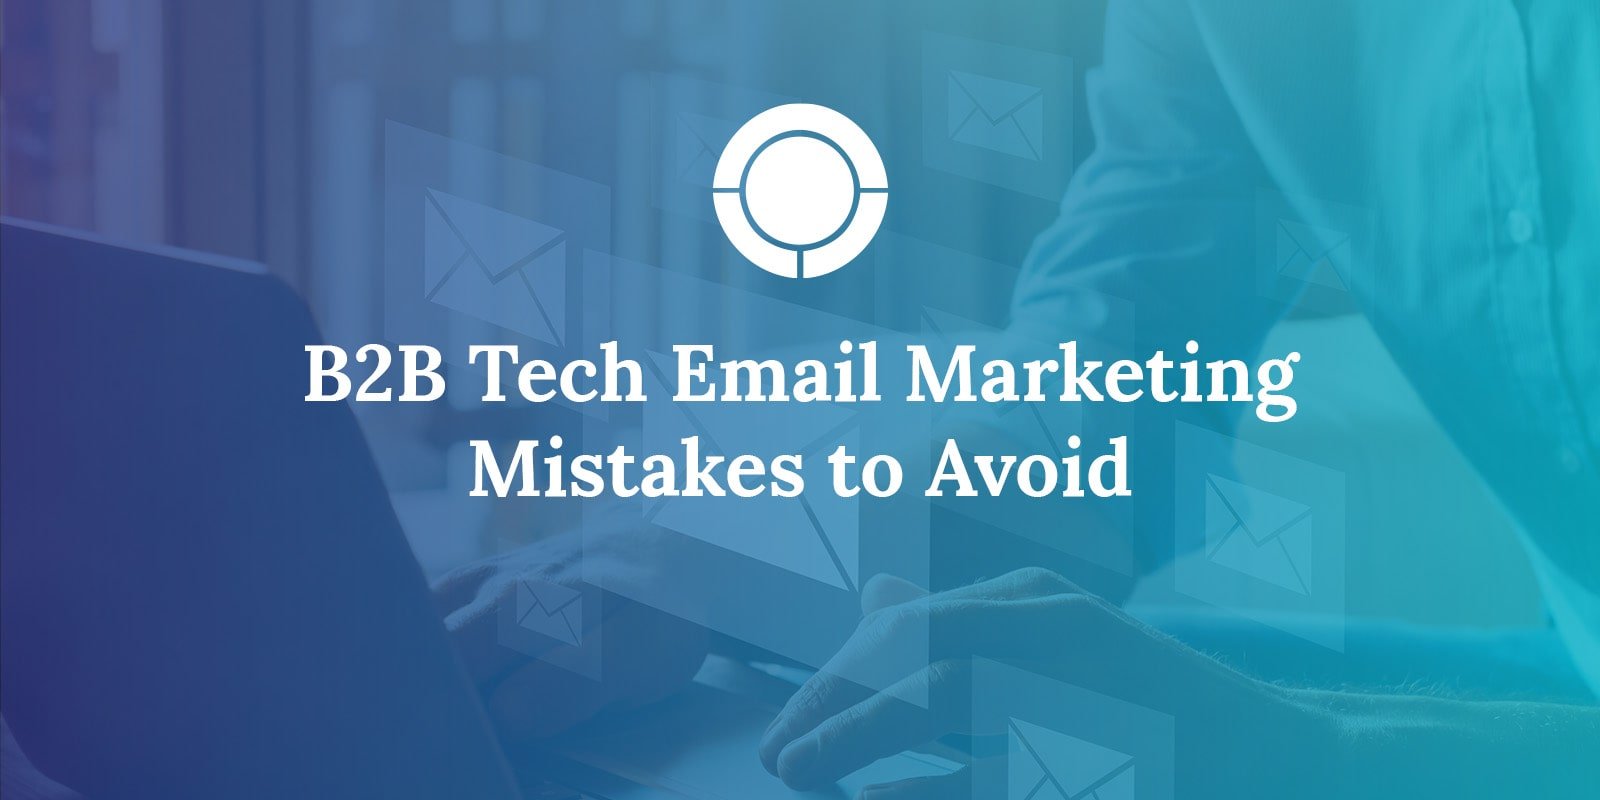 B2B Tech Email Marketing Mistakes to Avoid